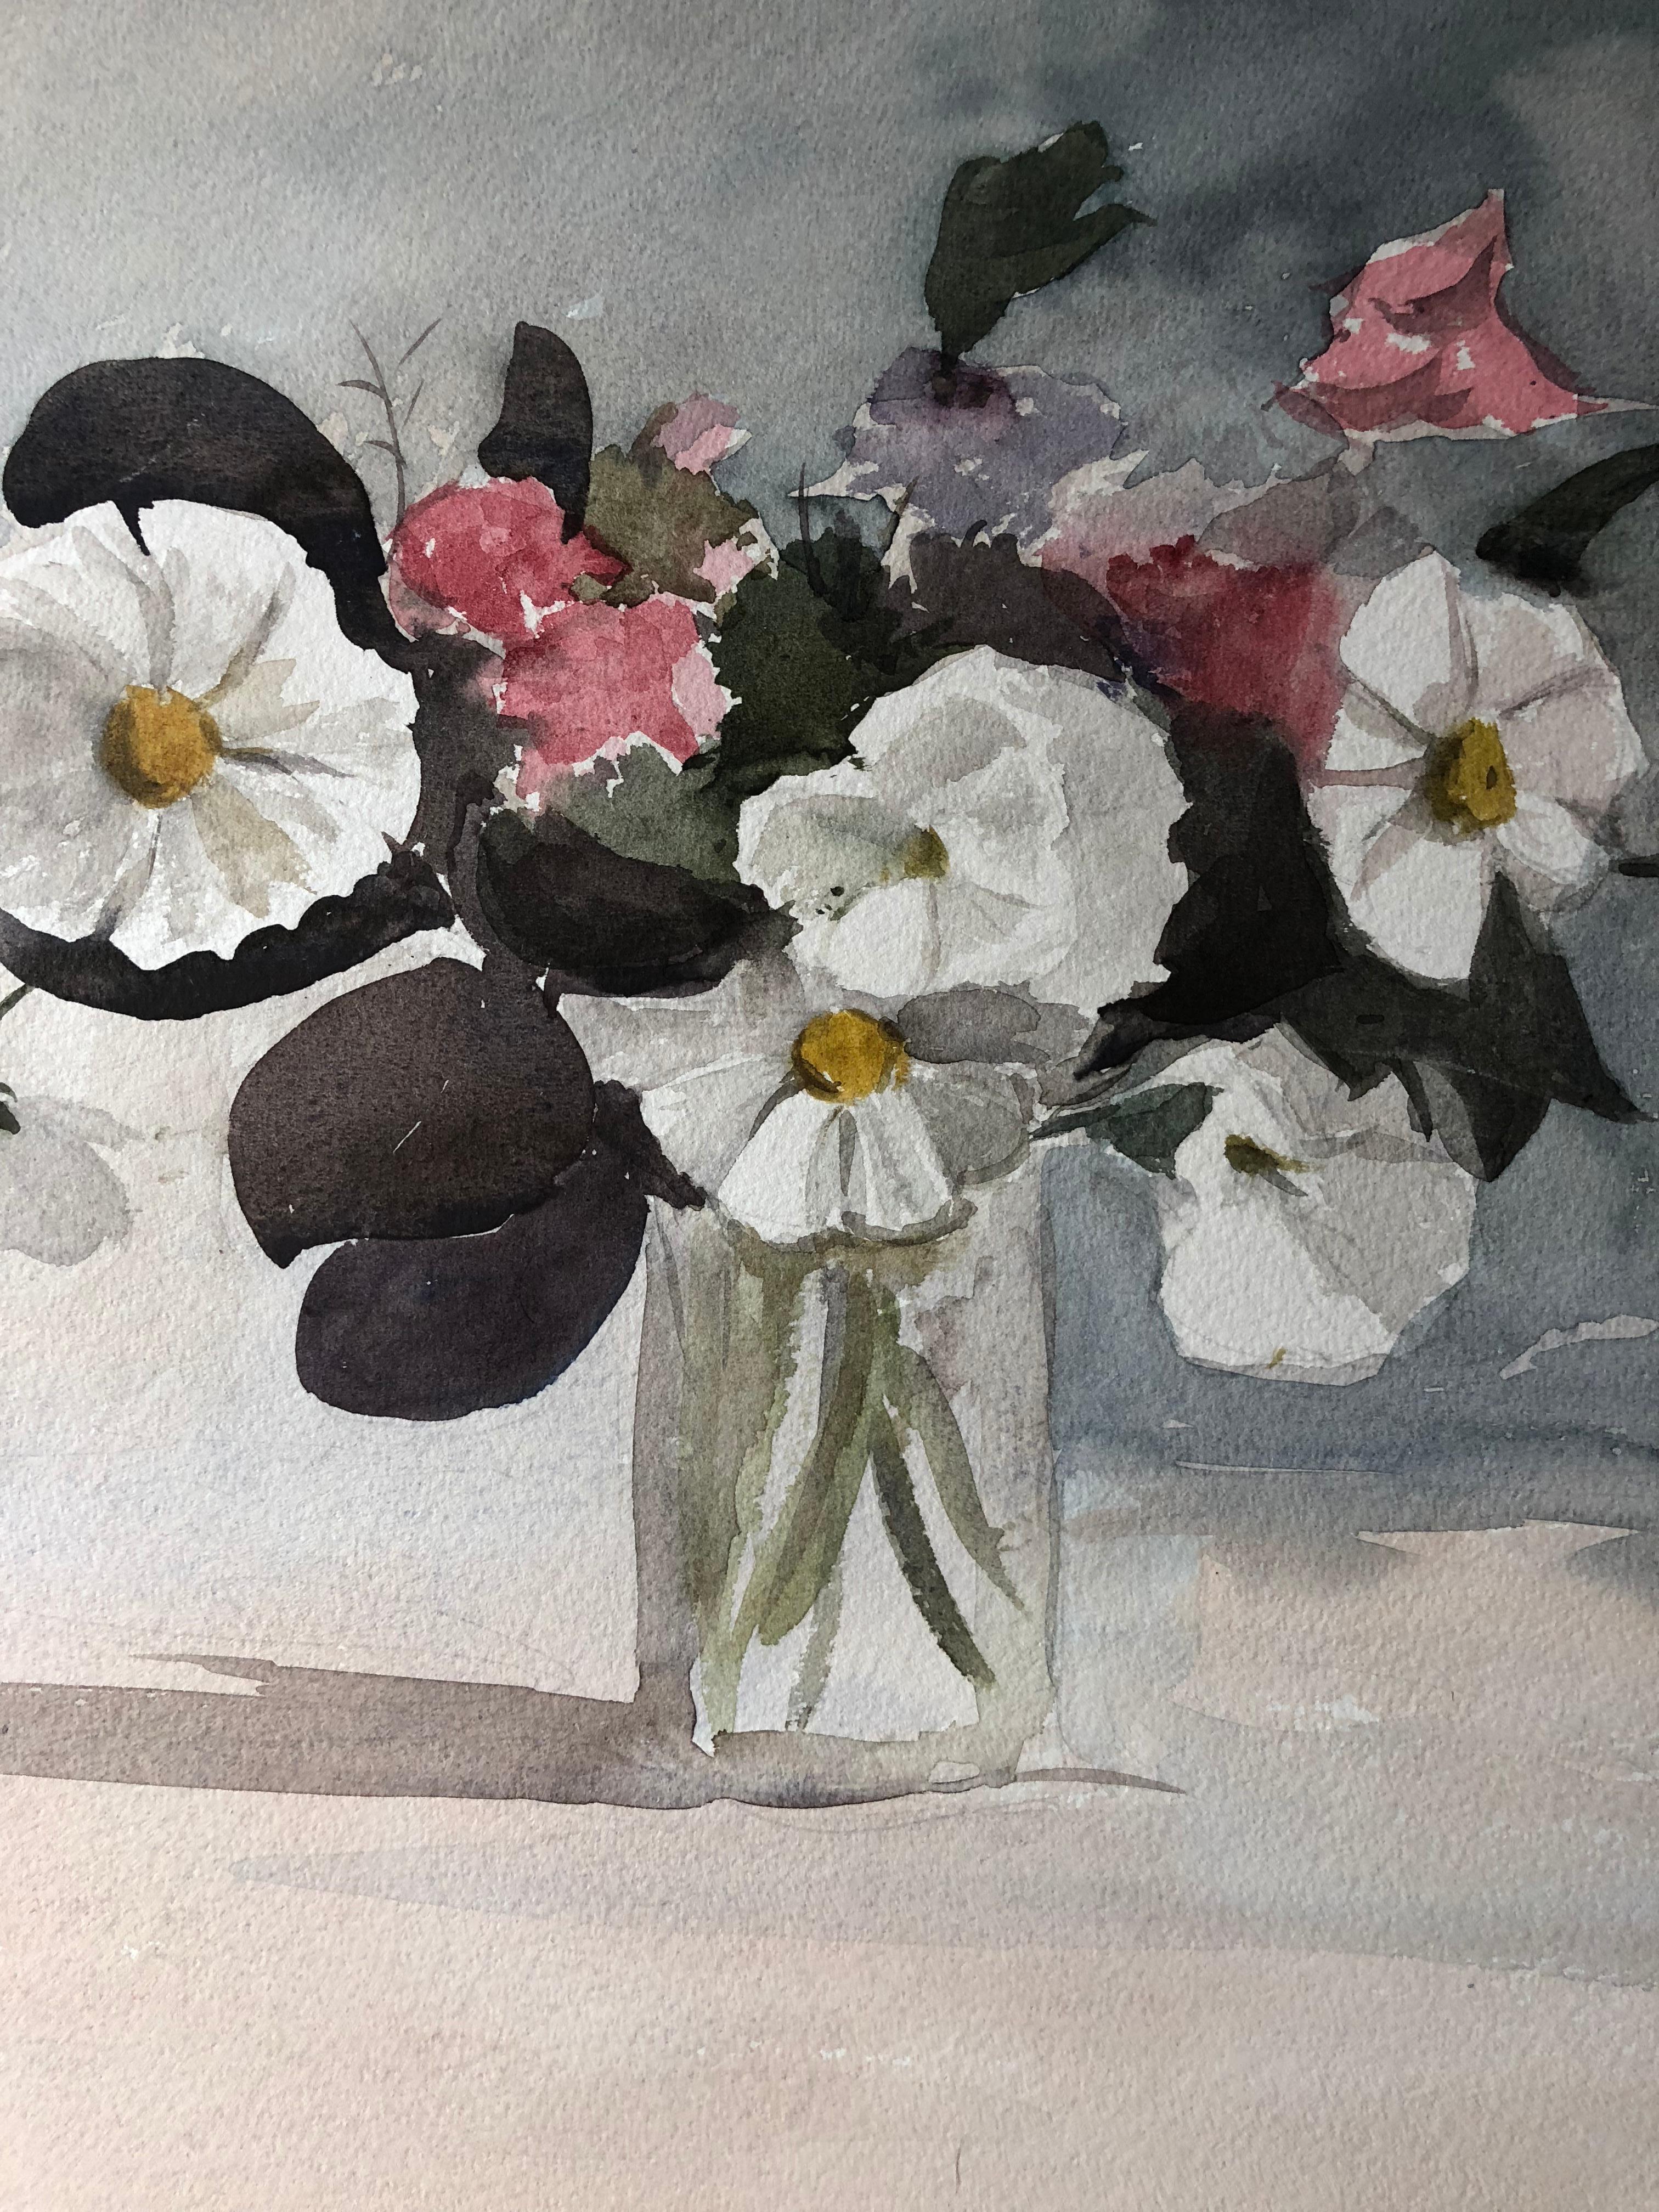 Vase of Flowers
by Ronald Birch, British circa 1970's
watercolour on art paper, unframed
overall paper measures: 15 x 22.25 inches

*FREE SHIPPING ON THIS PAINTING*: AMERICAN, EUROPE & UNITED KINGDOM

Lovely original watercolour painting by